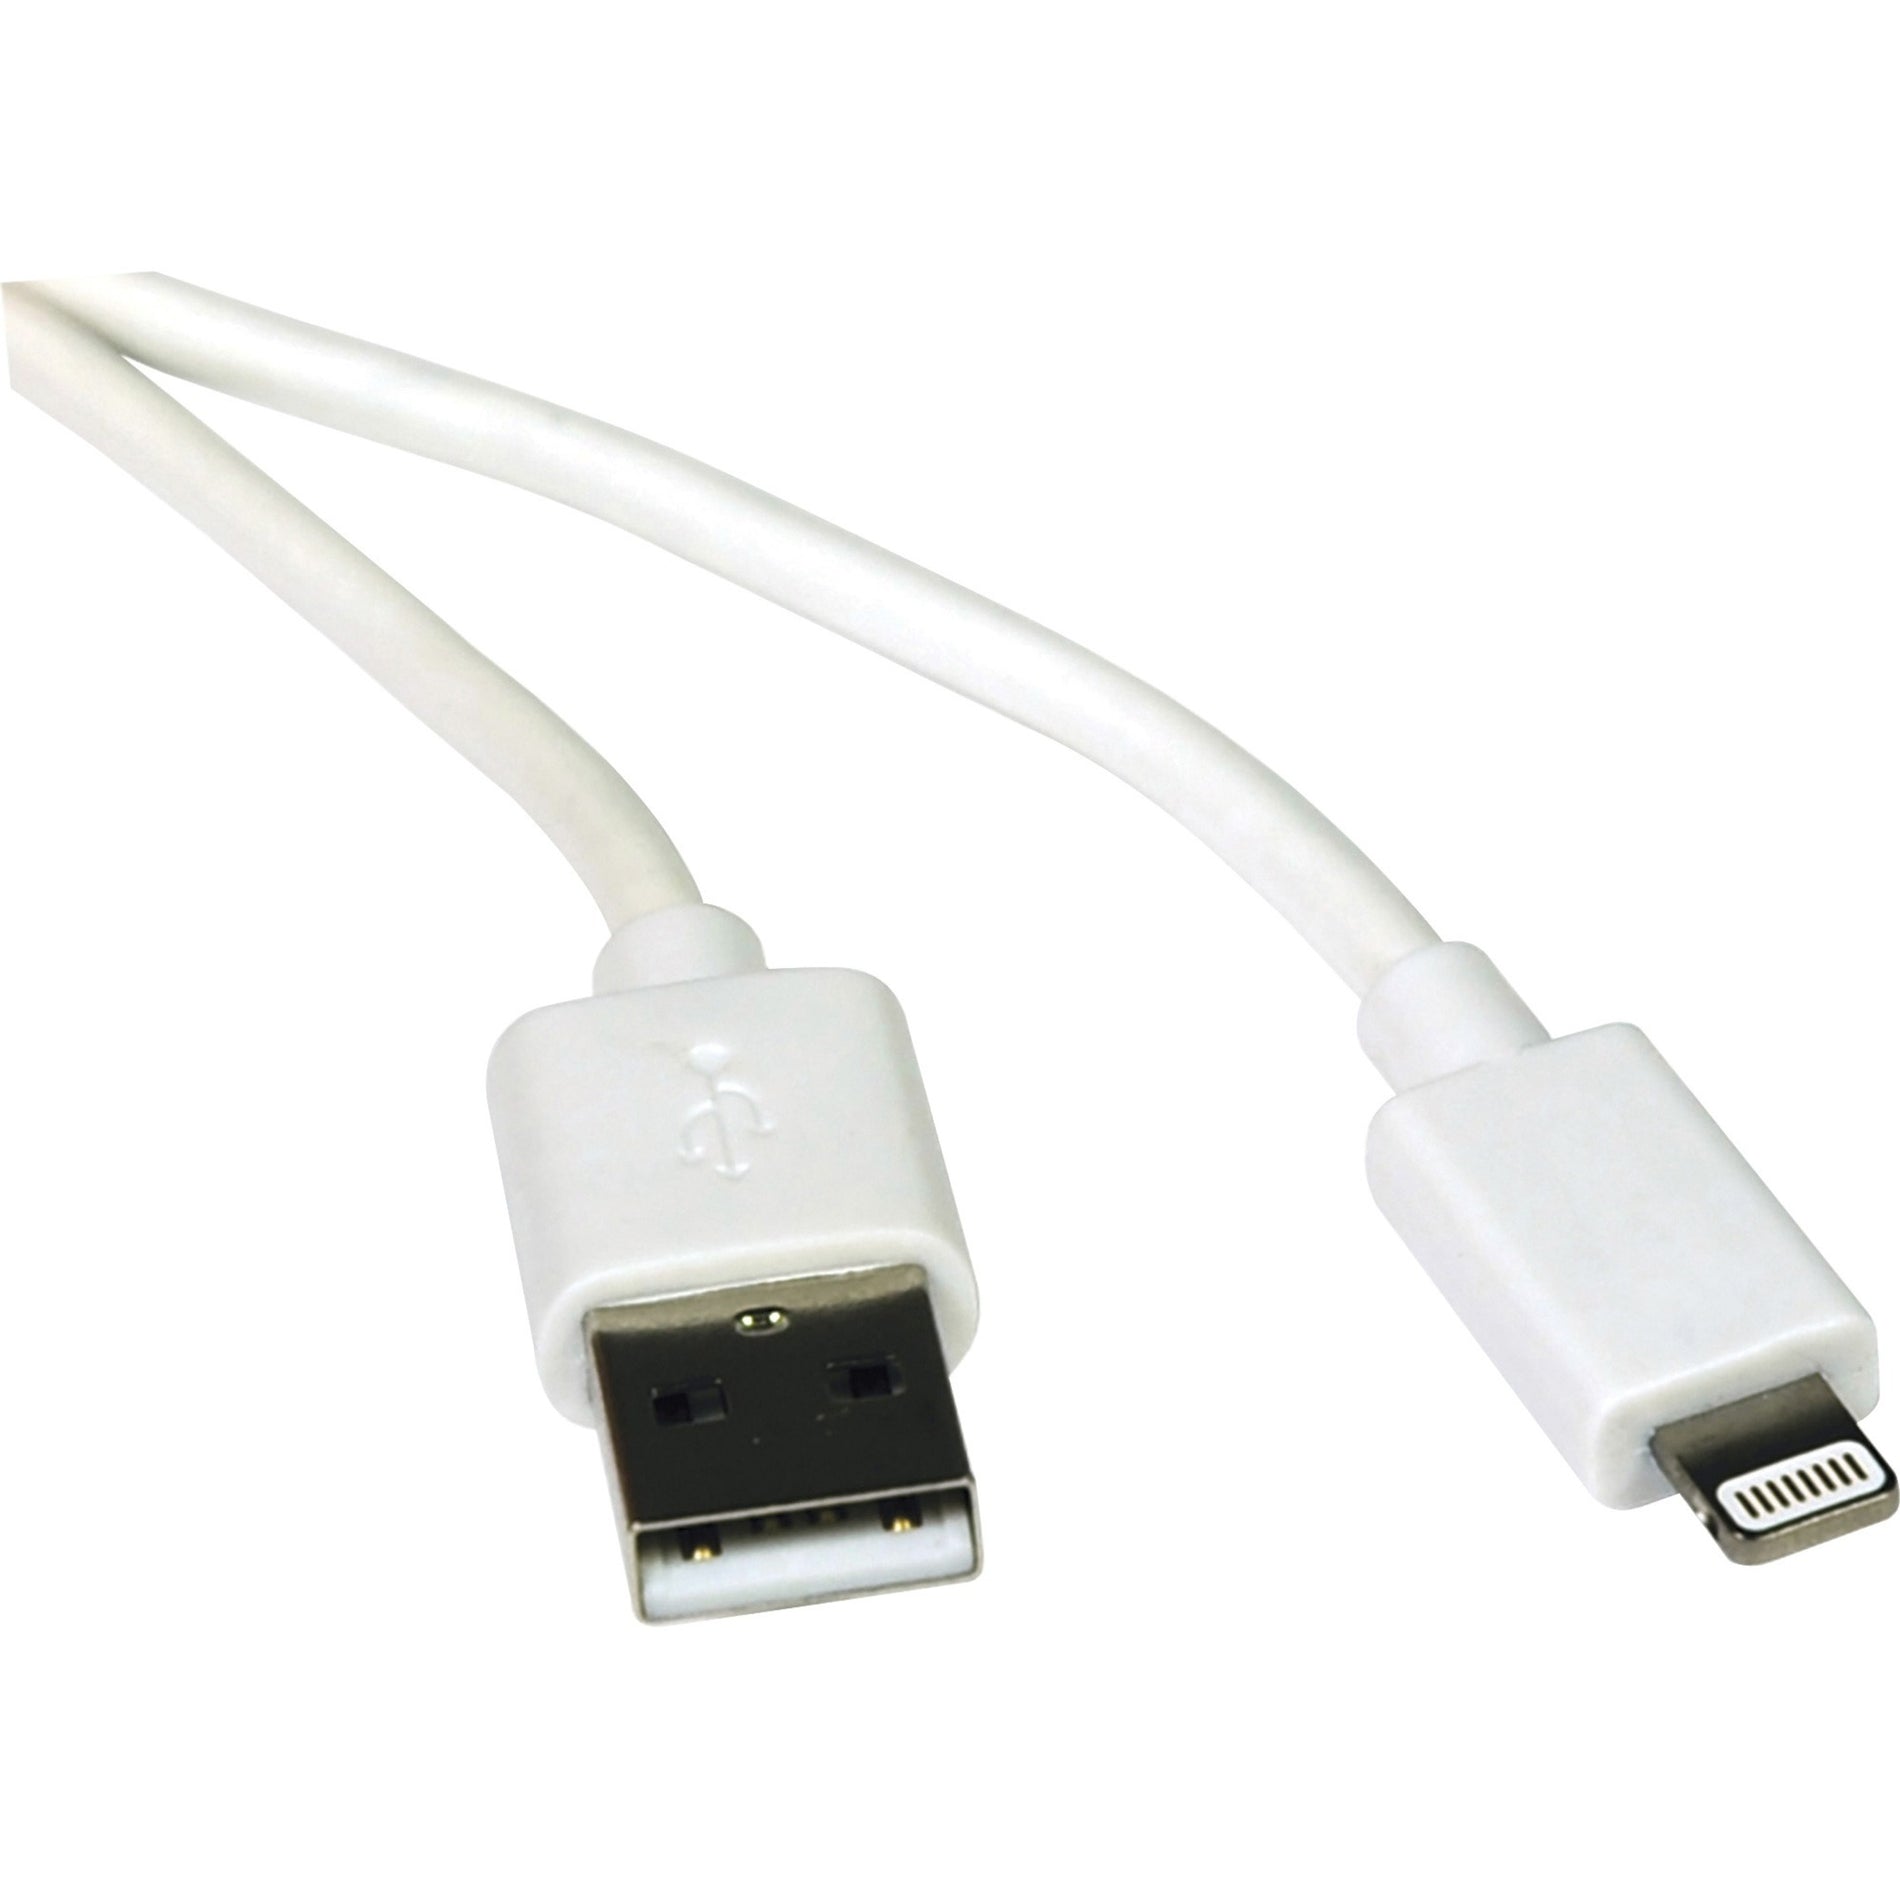 Tripp Lite M100-003-WH 3ft (1M) White USB Sync / Charge Cable with Lightning Connector, Compatible with iPhone, iPad, iPod